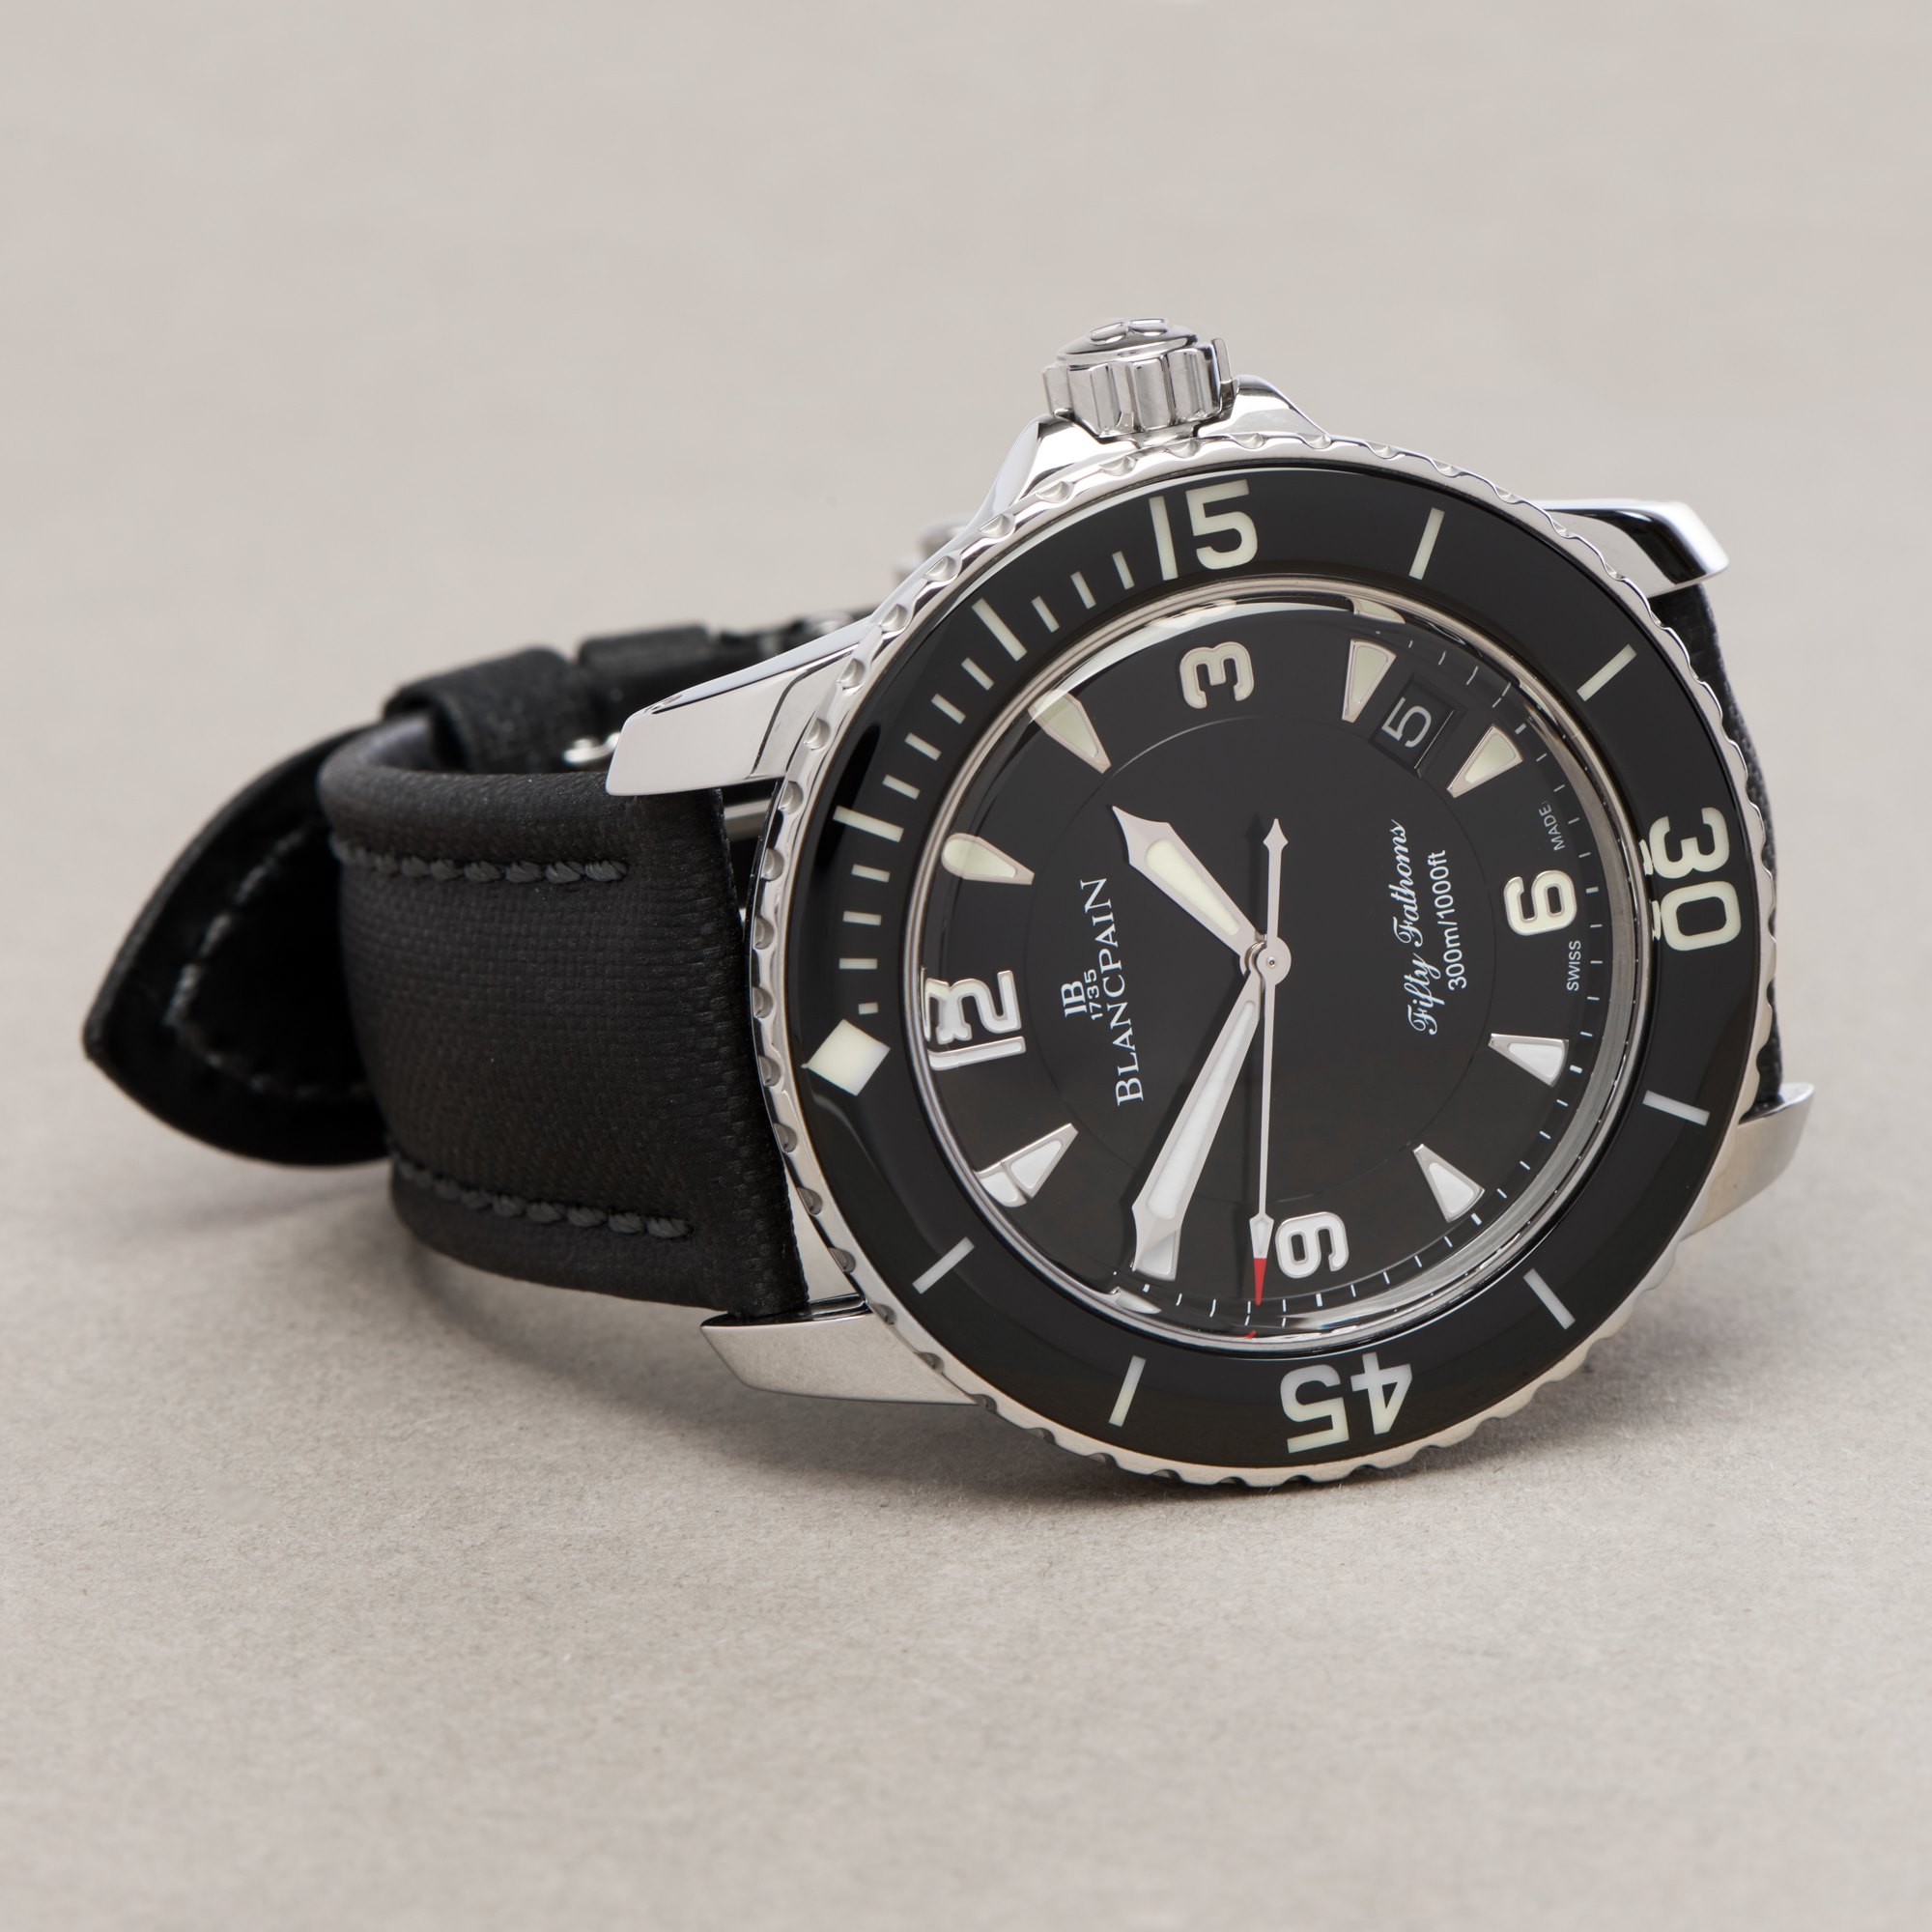 Blancpain Fifty Fathoms Roestvrij Staal 5015-1130-52